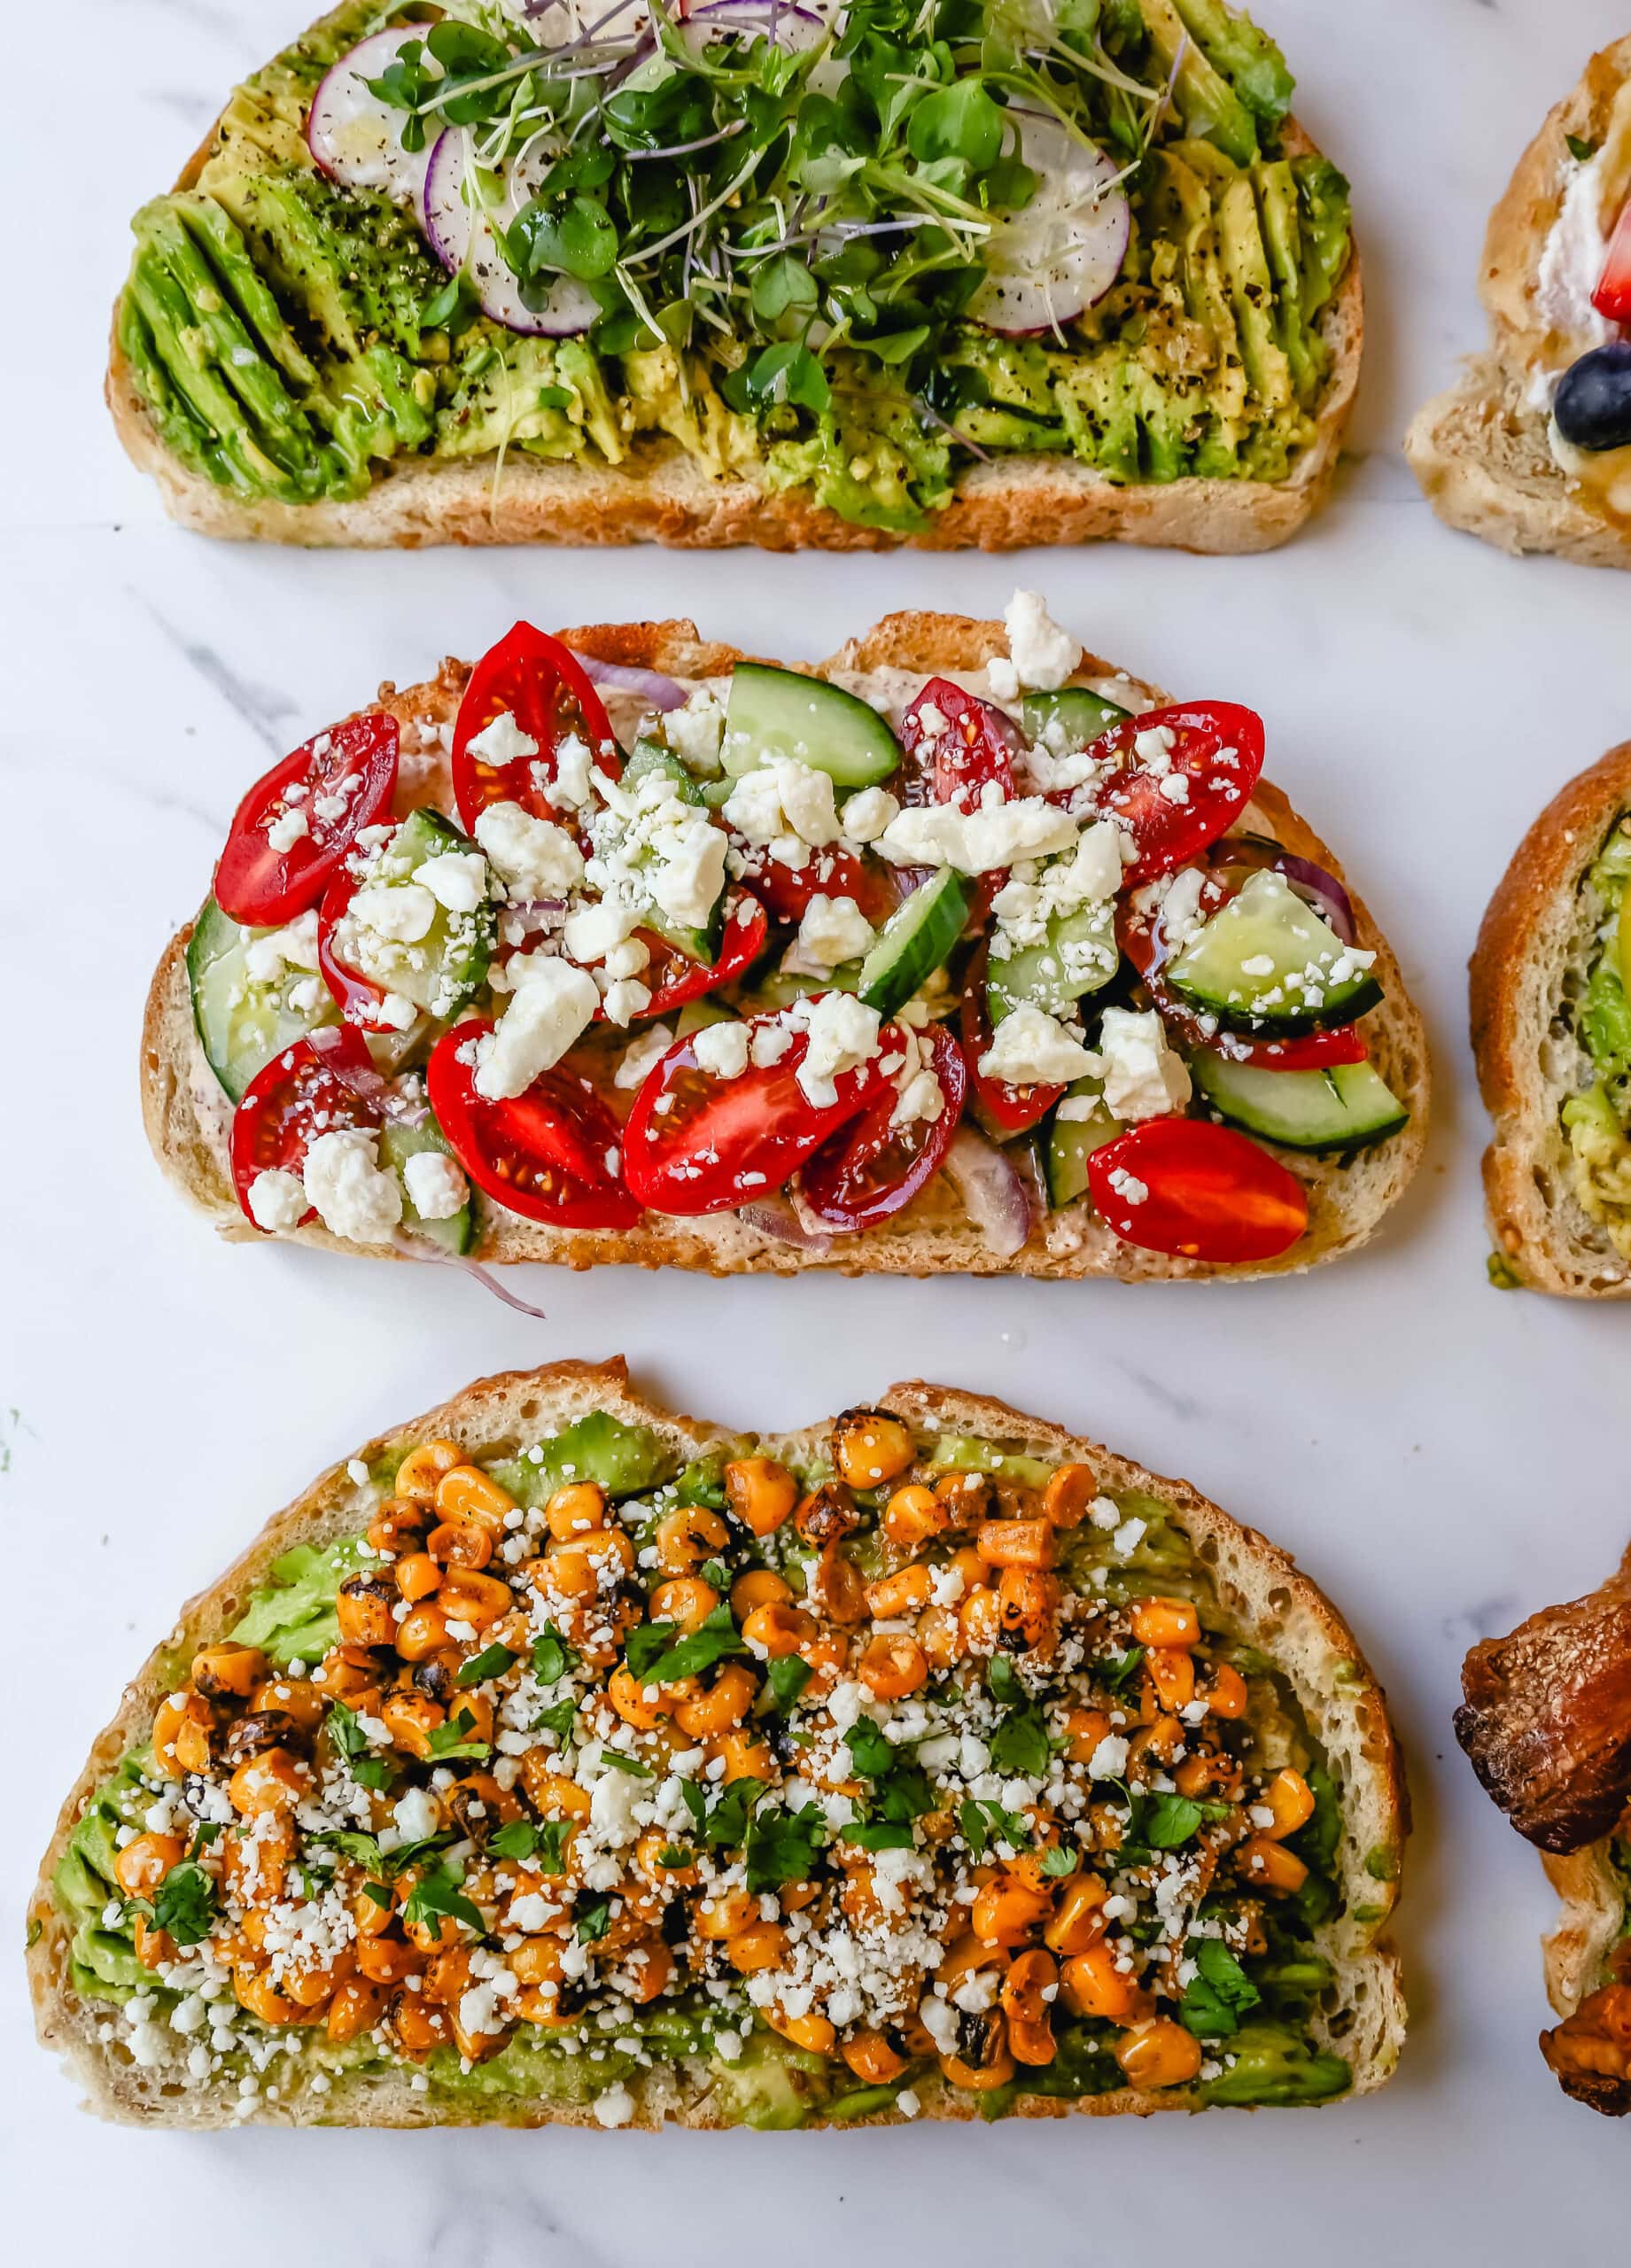 Gourmet Toast Ideas are perfect for quick lunches or for serving at a party. Avocado Toast topping ideas and suggestions for what to put on top of avocado toast. 